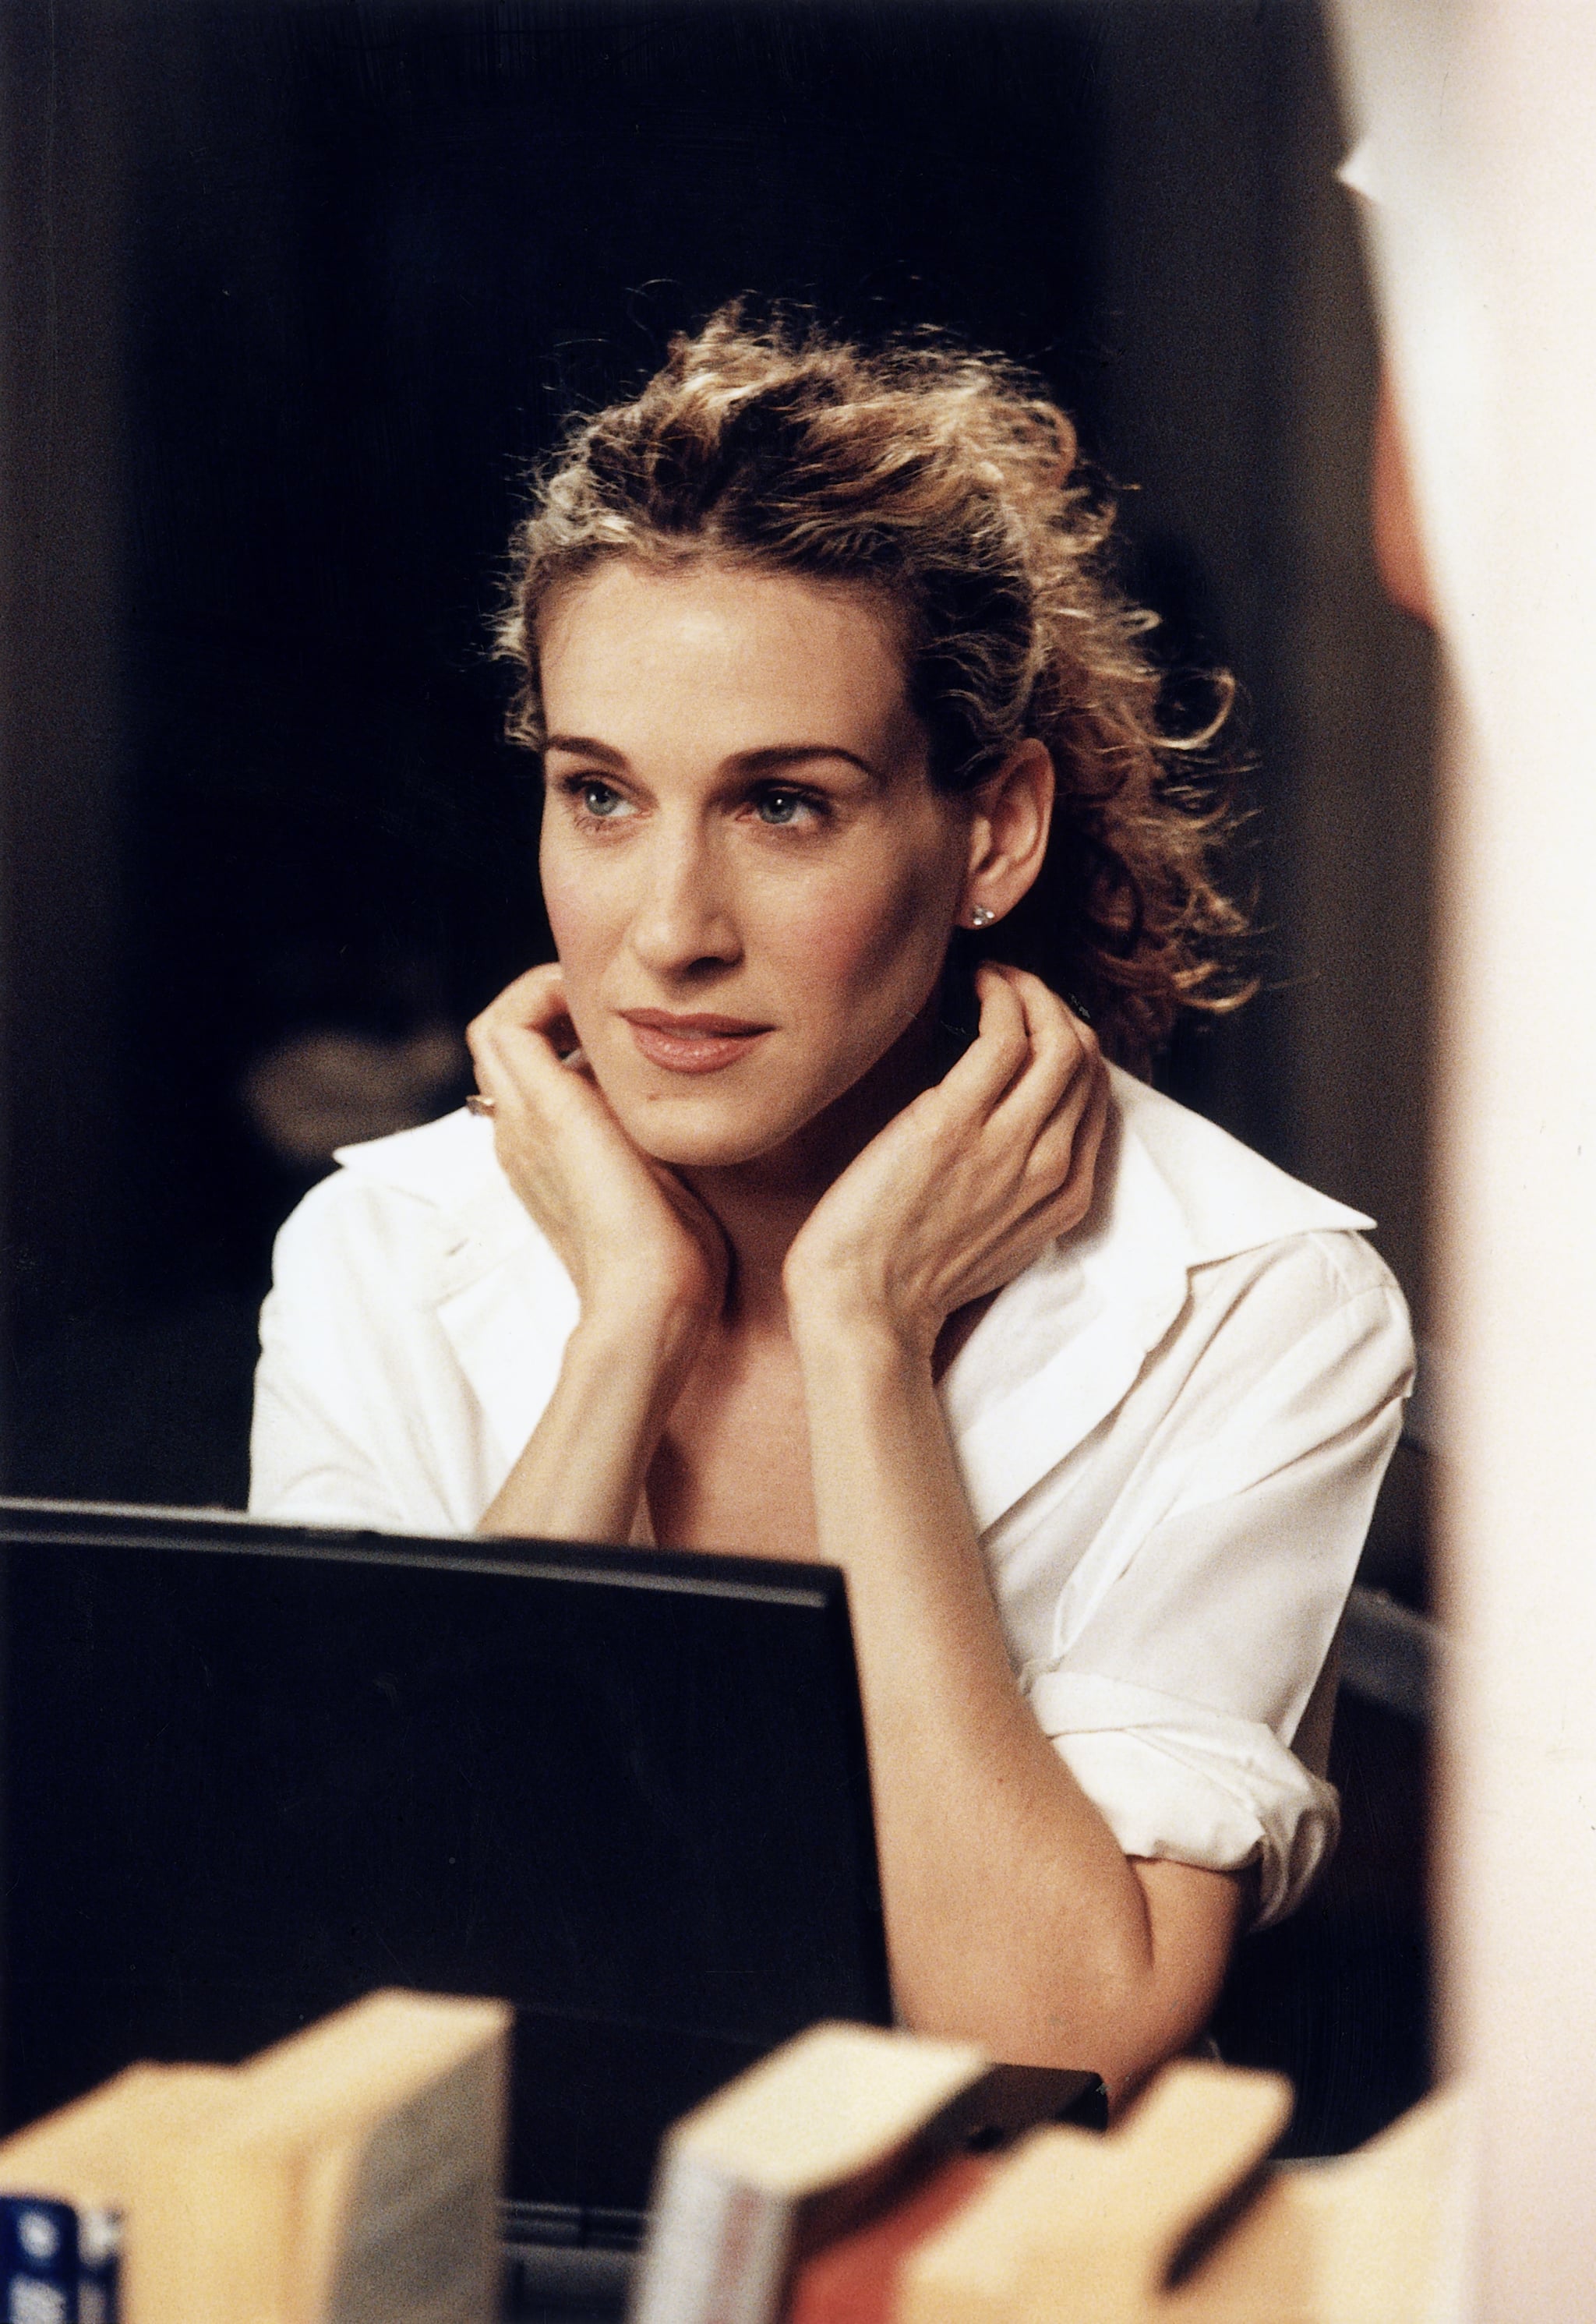 Carrie Bradshaw's Work-From-Home Outfits on Sex and the City